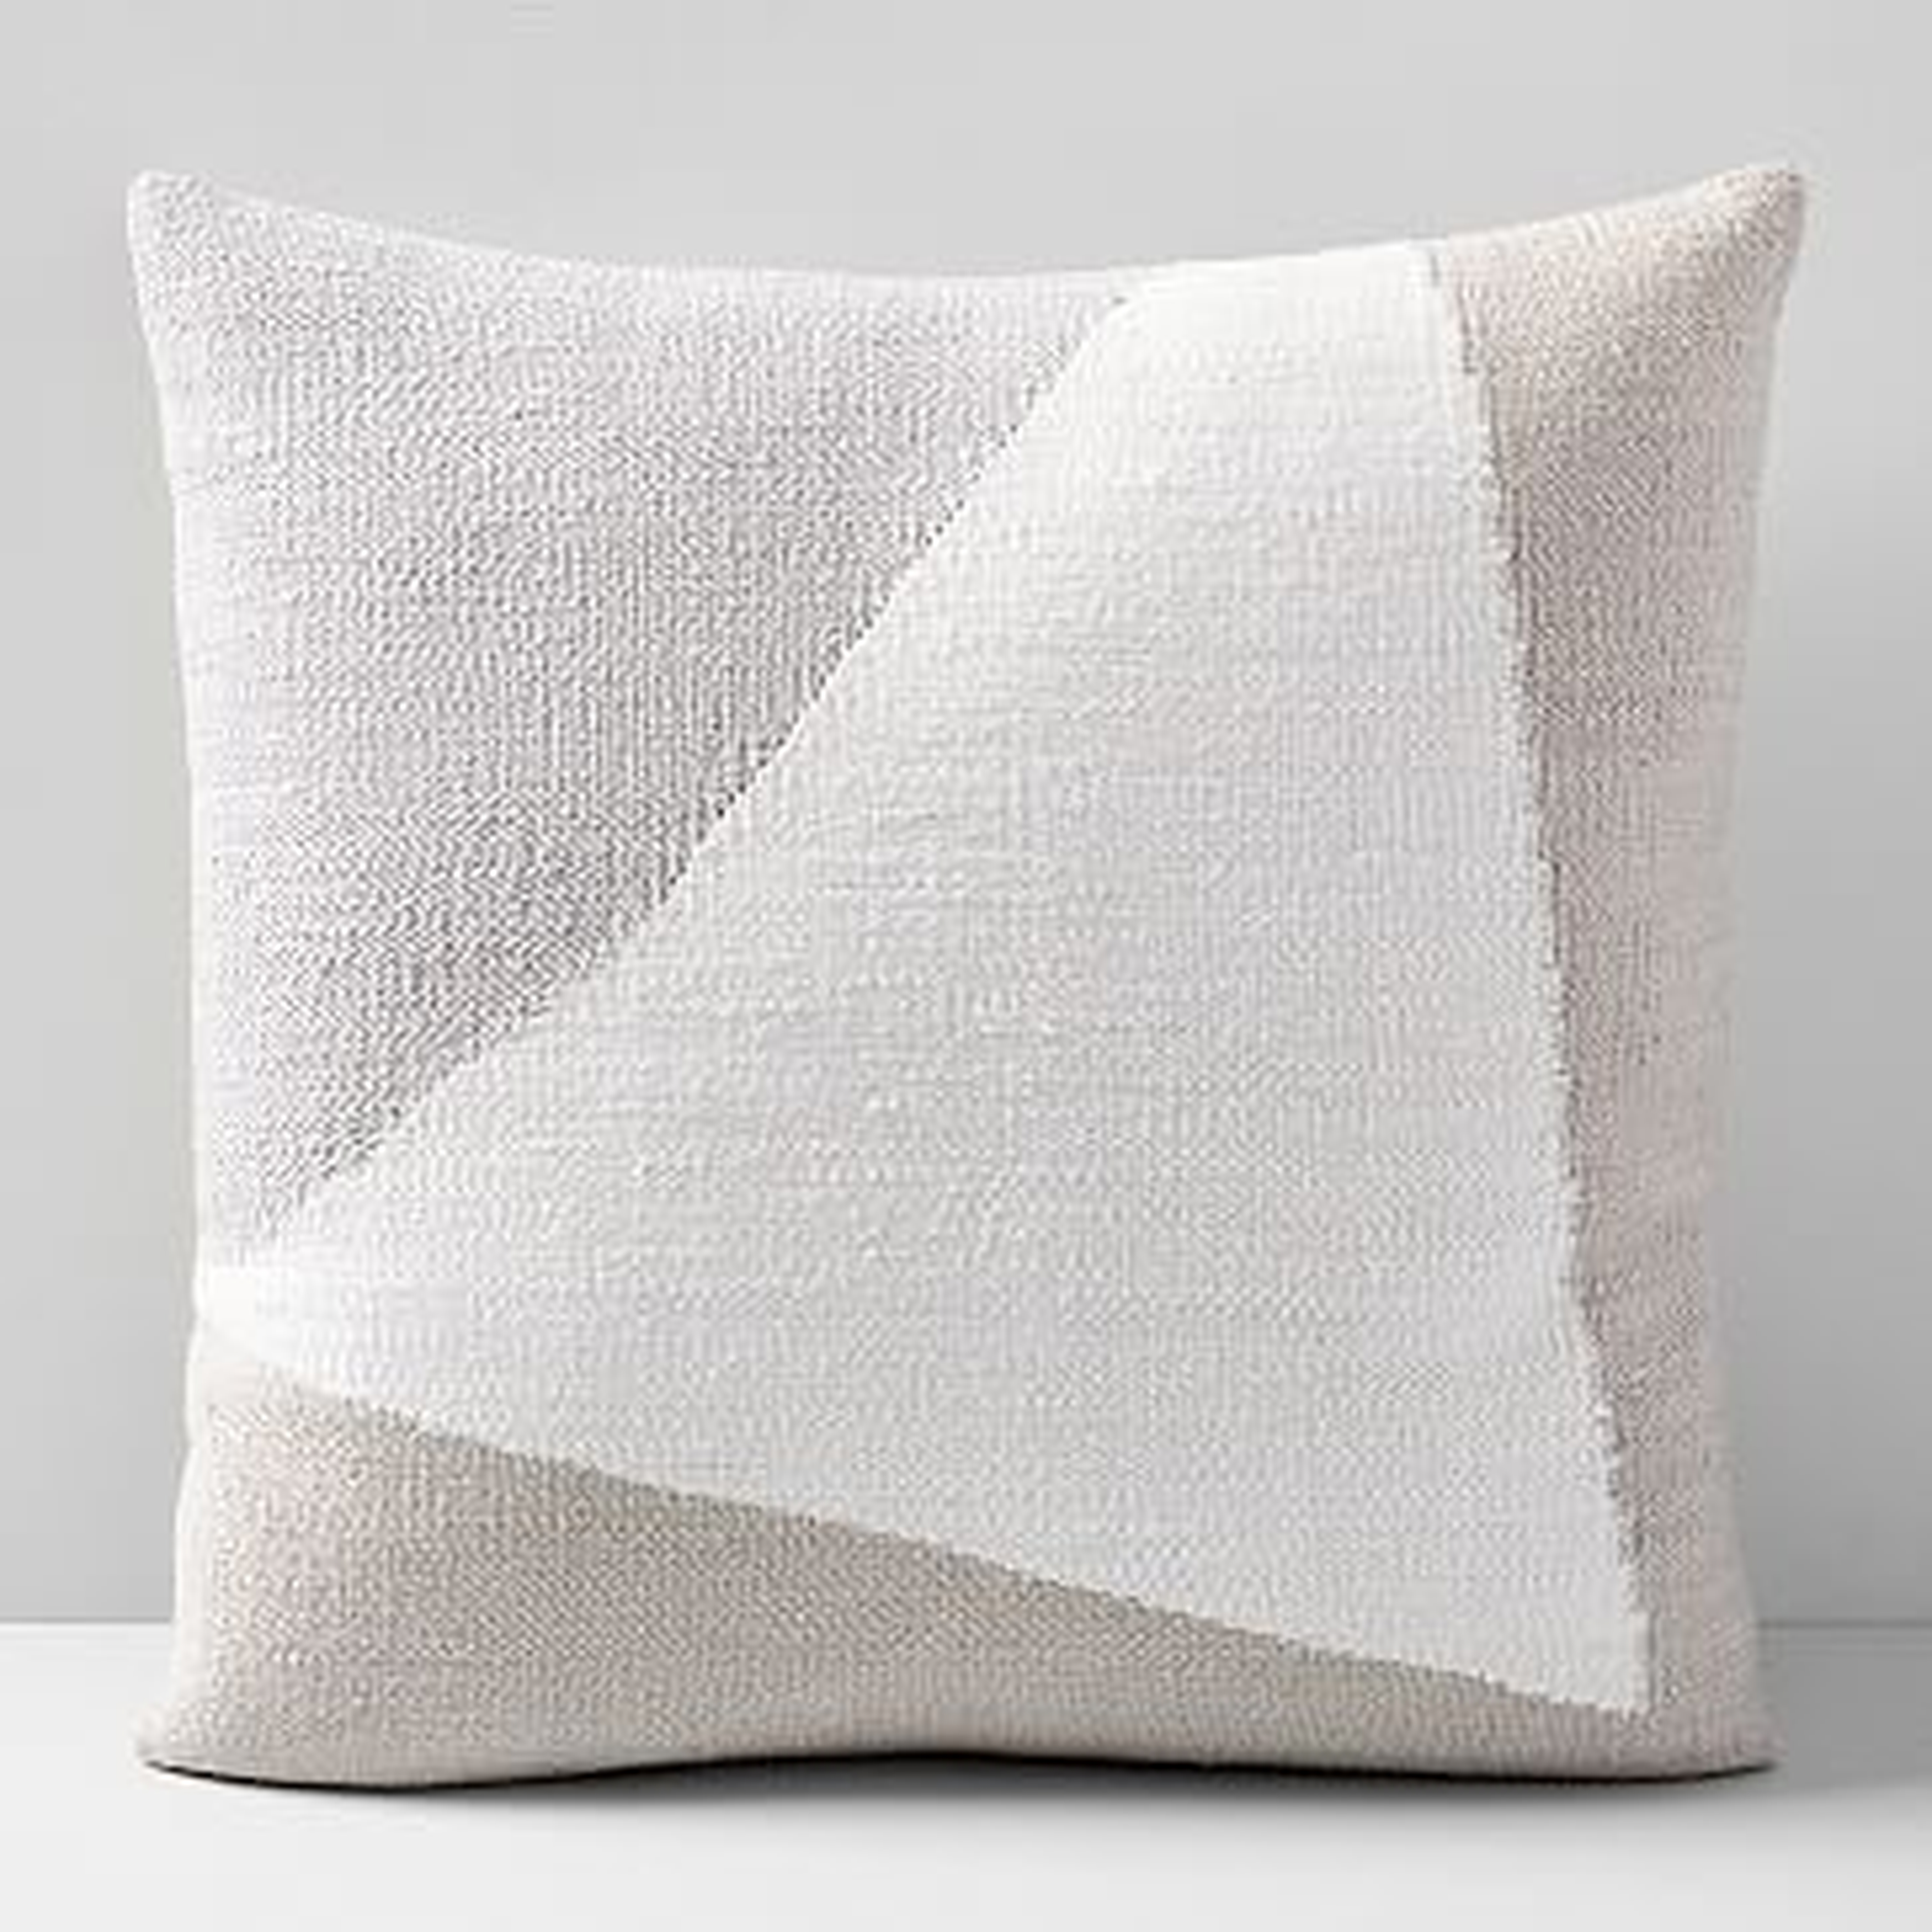 Amplified Arrow Pillow Cover, 24"x24", Frost Gray - West Elm